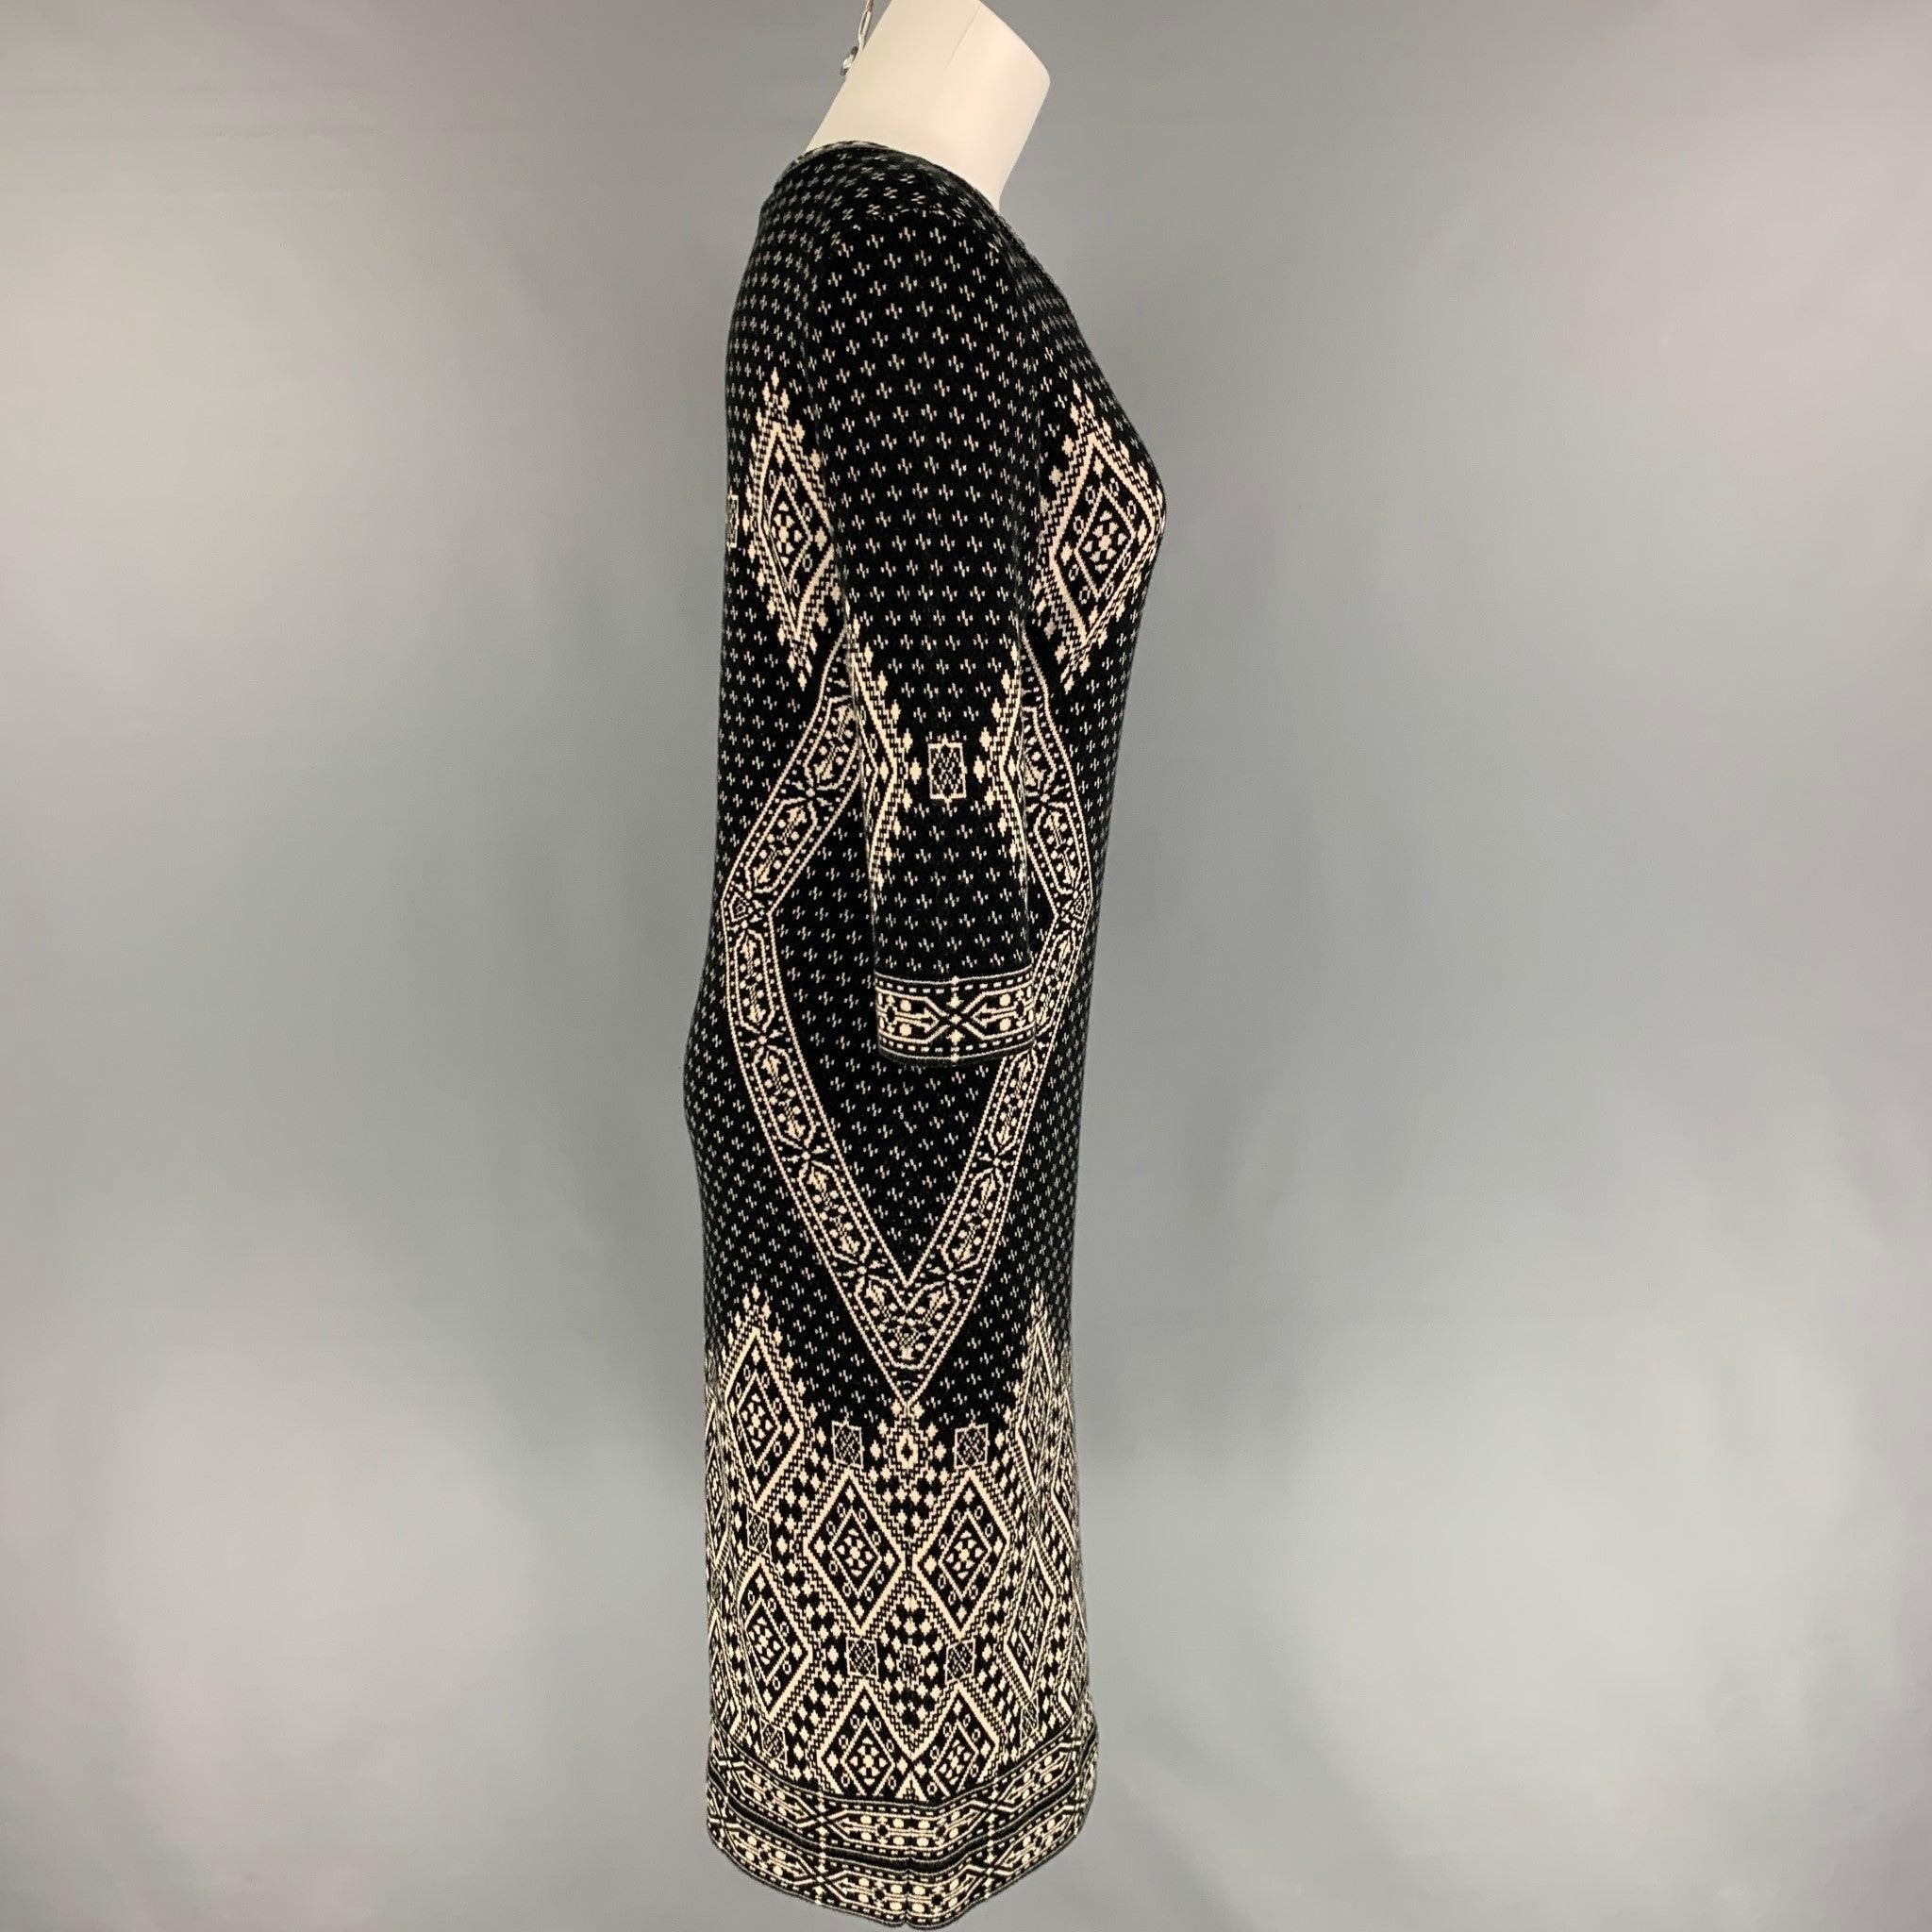 SAKS FIFTH AVENUE dress comes in a black & white print cotton blend featuring a wide neckline and 3/4 sleeves.
Very Good
Pre-Owned Condition. 

Marked:   M  

Measurements: 
 
Shoulder: 16.5 inches  Bust: 34 inches  Waist: 30 inches  Hip: 34 inches 